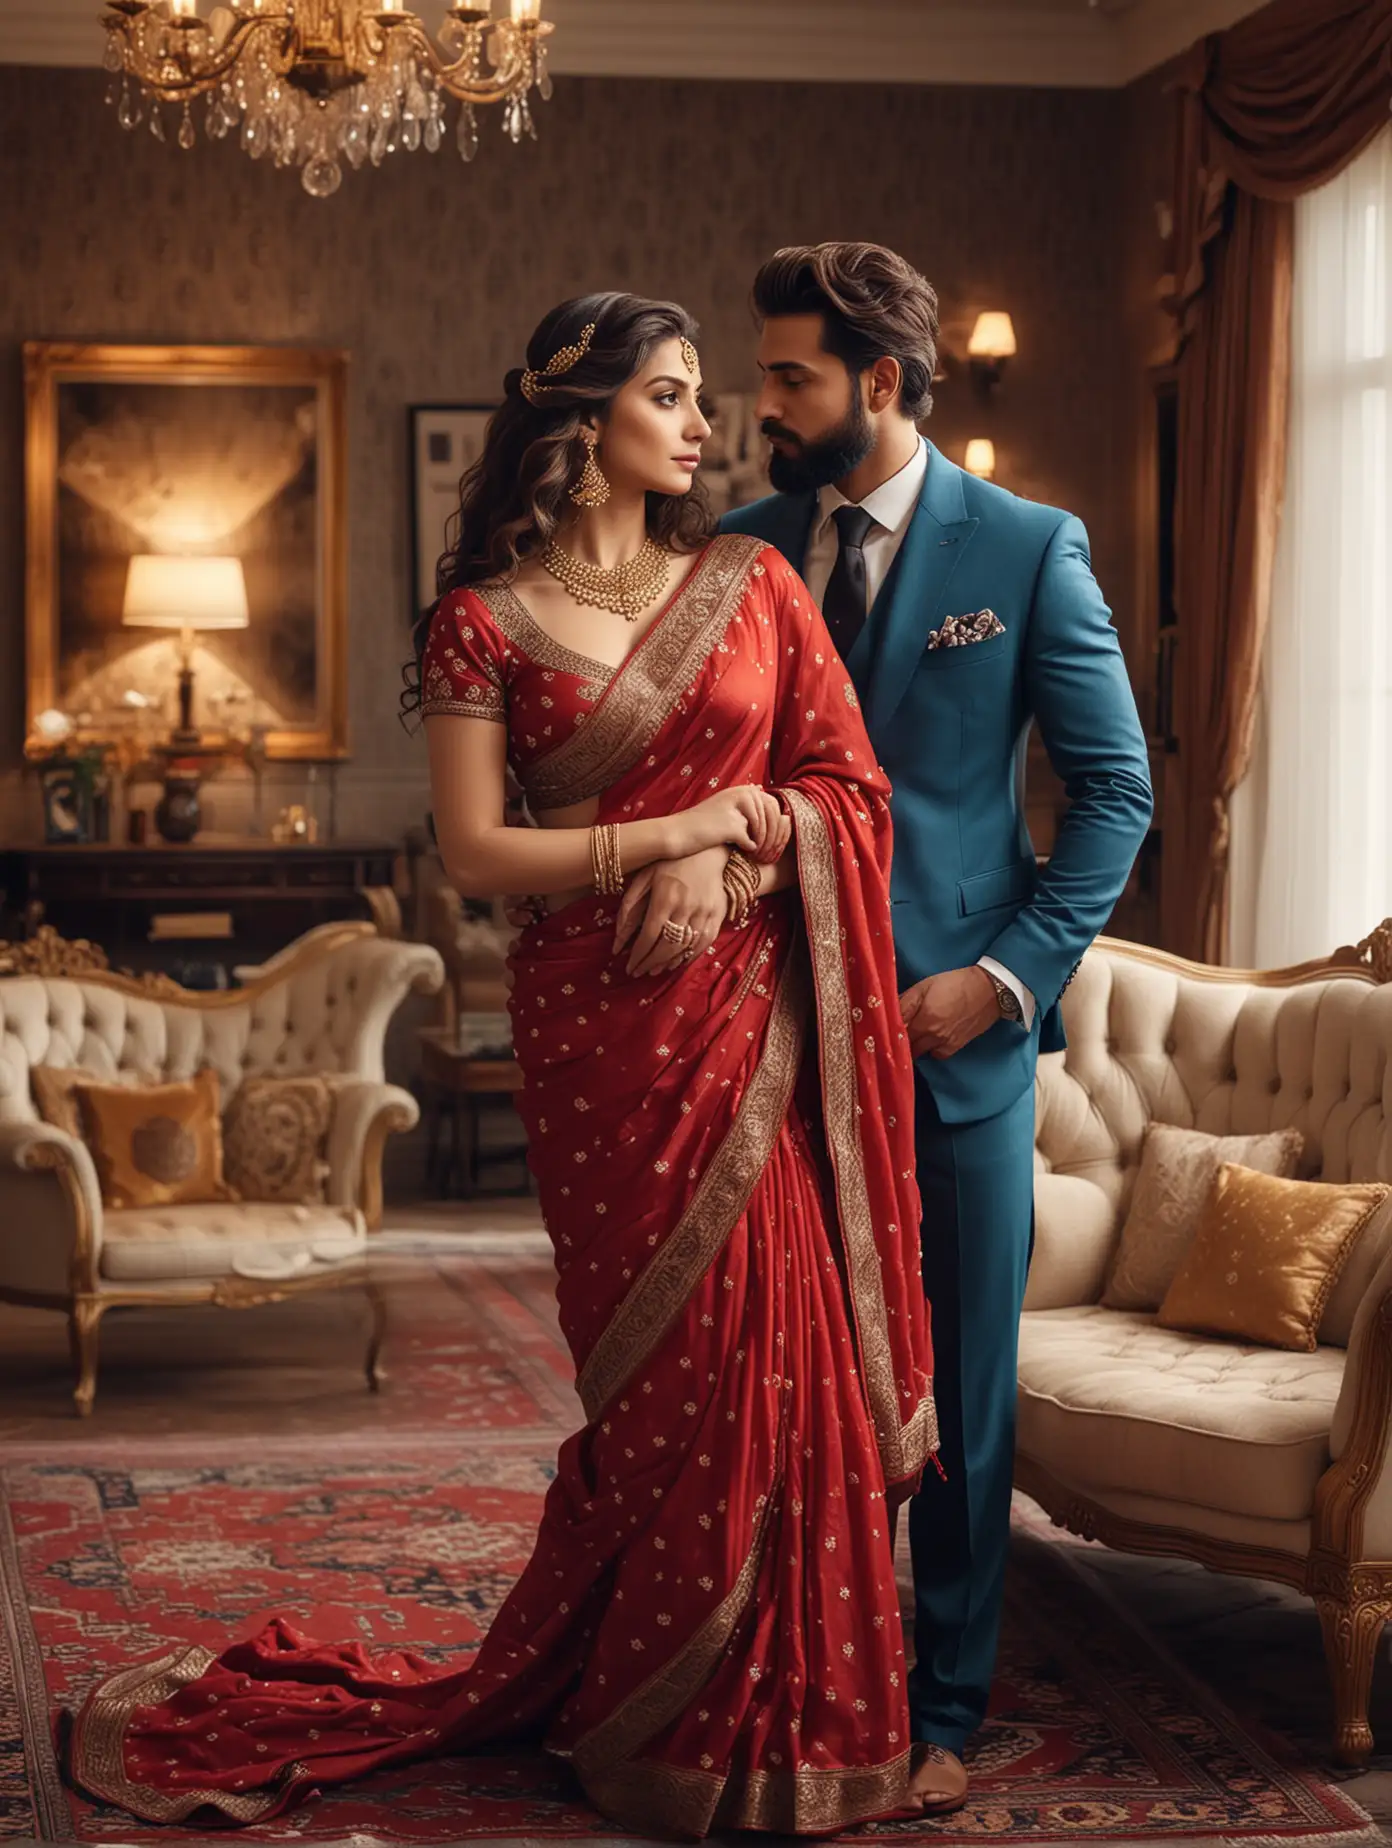 full body view  of most beautiful european couple as most beautiful indian couple, most beautiful girl in elegant bold color saree, long curly hairs, hairs tied  up with hair style stylishly, necklace,   big wide black  eyes, full face, perfect red dot, makeup, very low cut back with big knot, beautiful symmetric low cut back she turned away,  man kissing her on back she looking back over shoulders with ecstasy and inviting feeling, with ecstasy, emotional  with longing feeling, innocence and ecstasy,  man with trimmed  stylish beard, perfect trim  hair cut, formals, perfect limbs , hands and fingers, photo realistic, 4k. background, spacious modern elite photo room, with luxury sofa set,  carpet, elegant interior designs, vintage lamps, romantic reunion ambience, photorealistic, vibrant colours, intricate details, 8k.